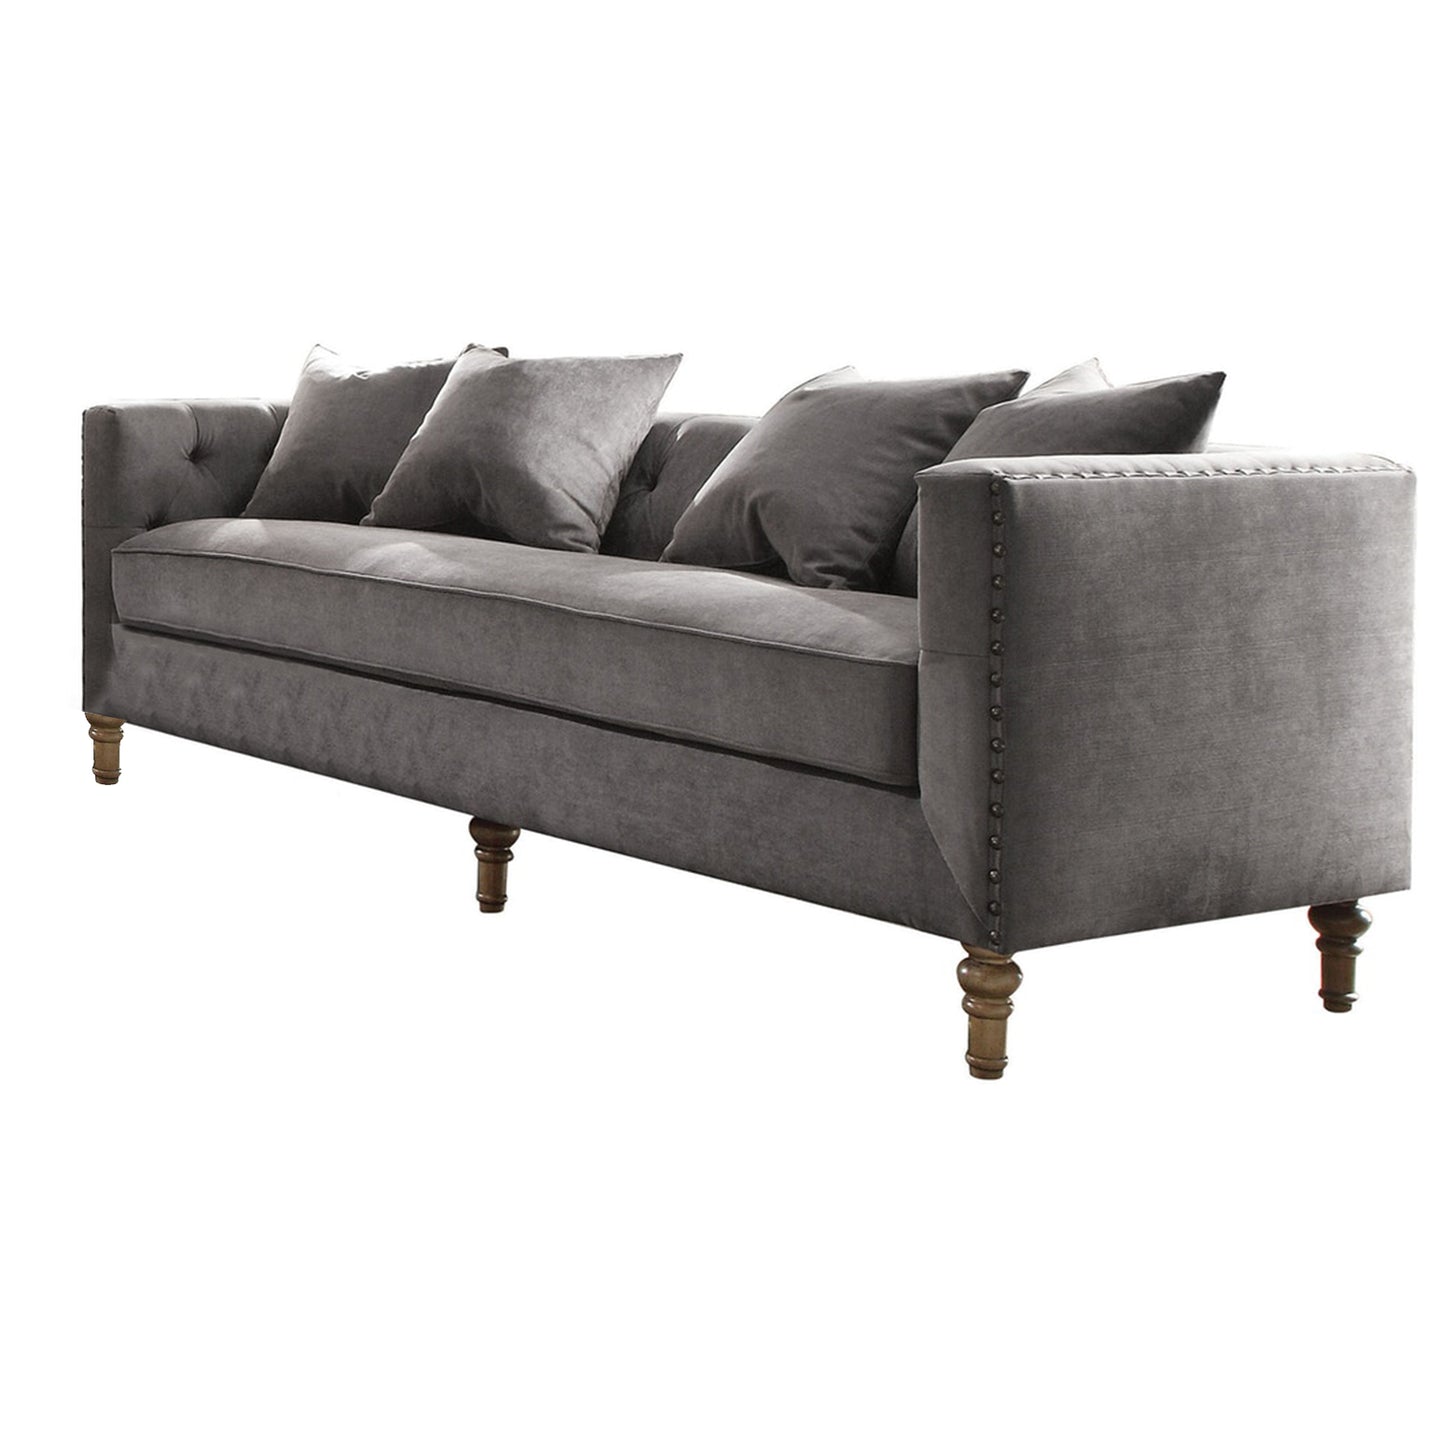 34" Gray Velvet Sofa And Toss Pillows With Brown Legs